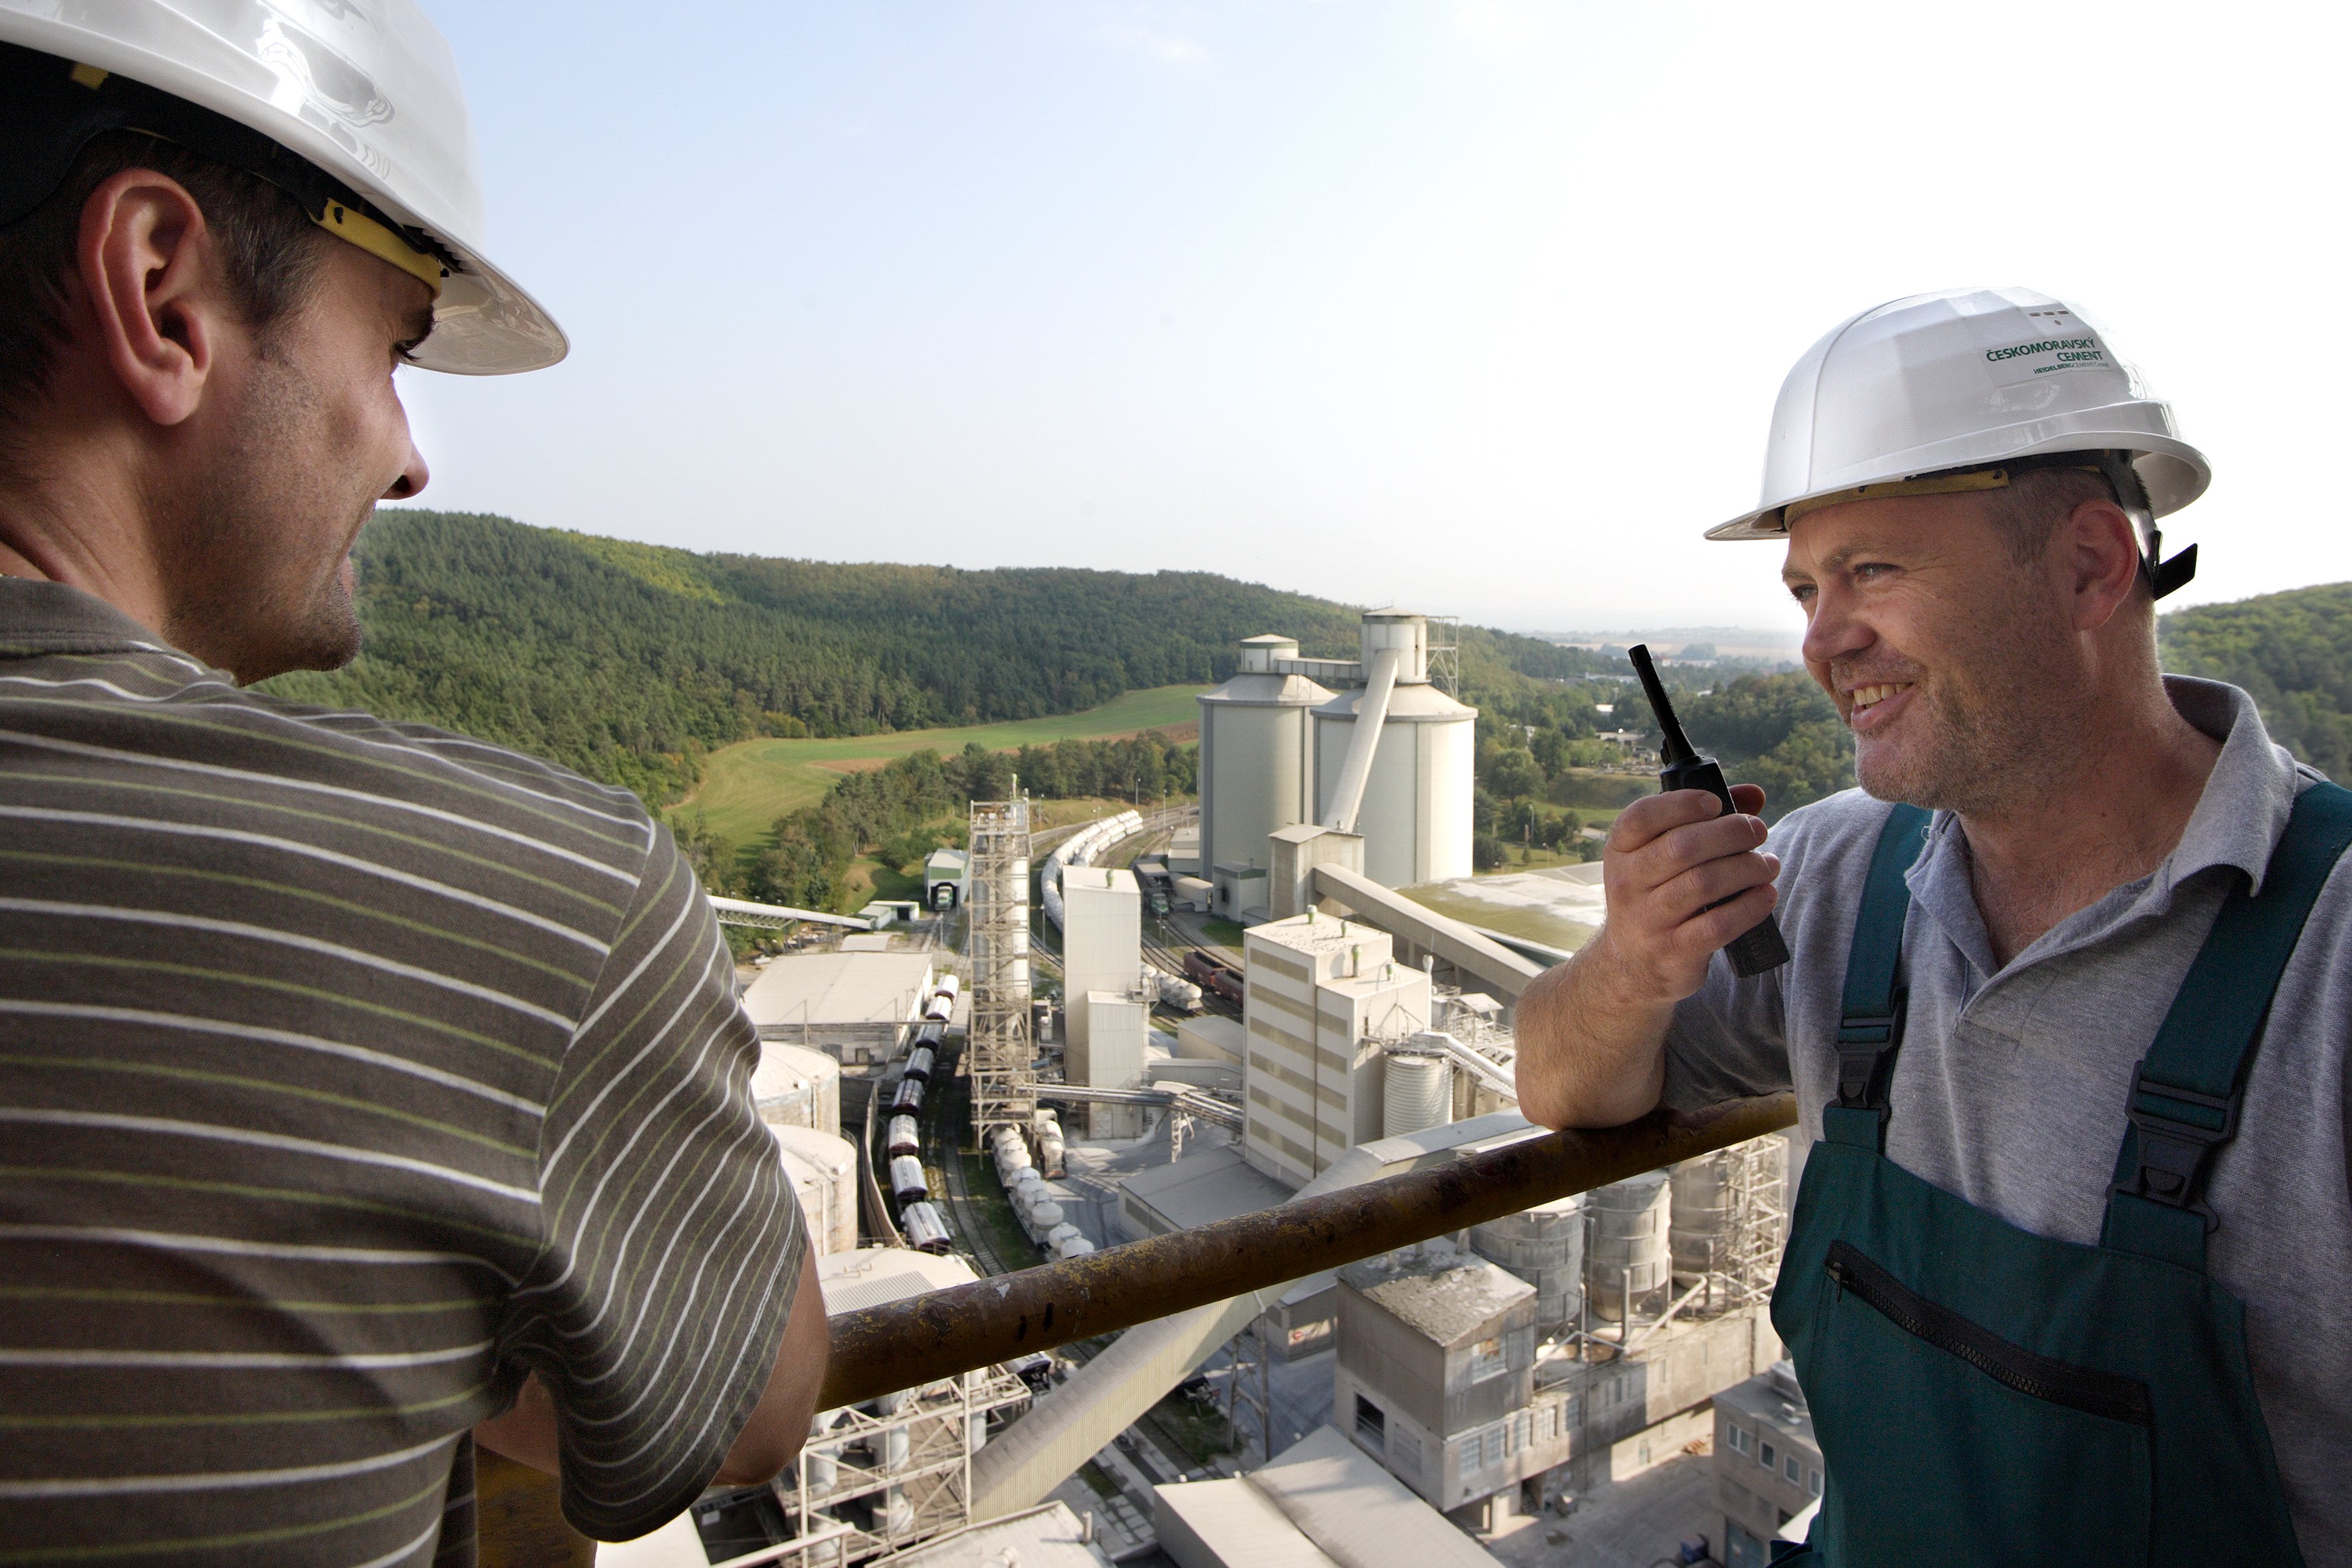 Two men standing on a platform overlooking a cement plant